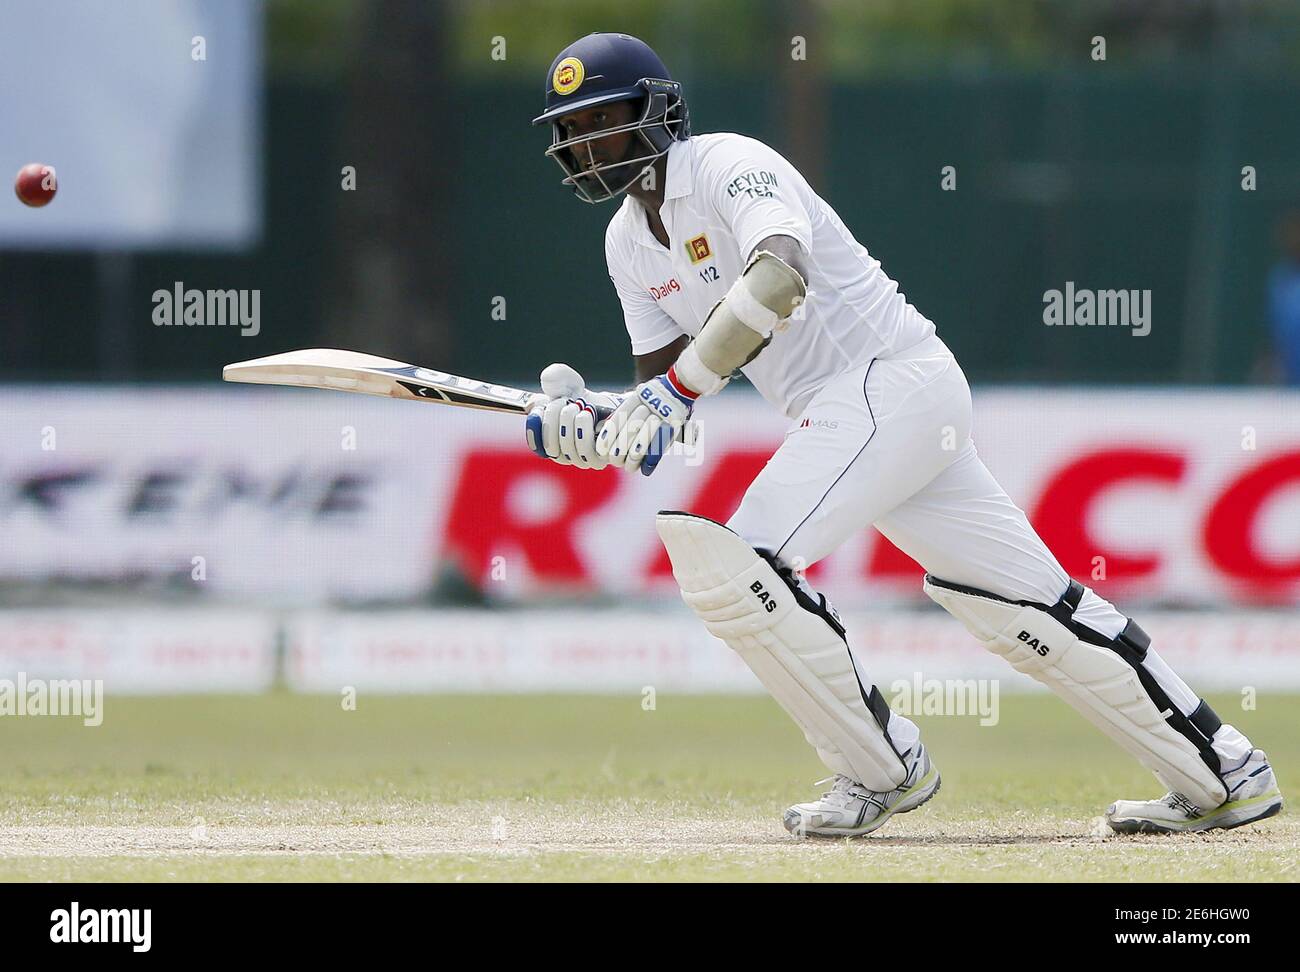 Sri Lanka's captain Angelo Mathews plays a shot during the third day of their second test cricket match against India in Colombo August 22, 2015. REUTERS/Dinuka Liyanawatte Stock Photo